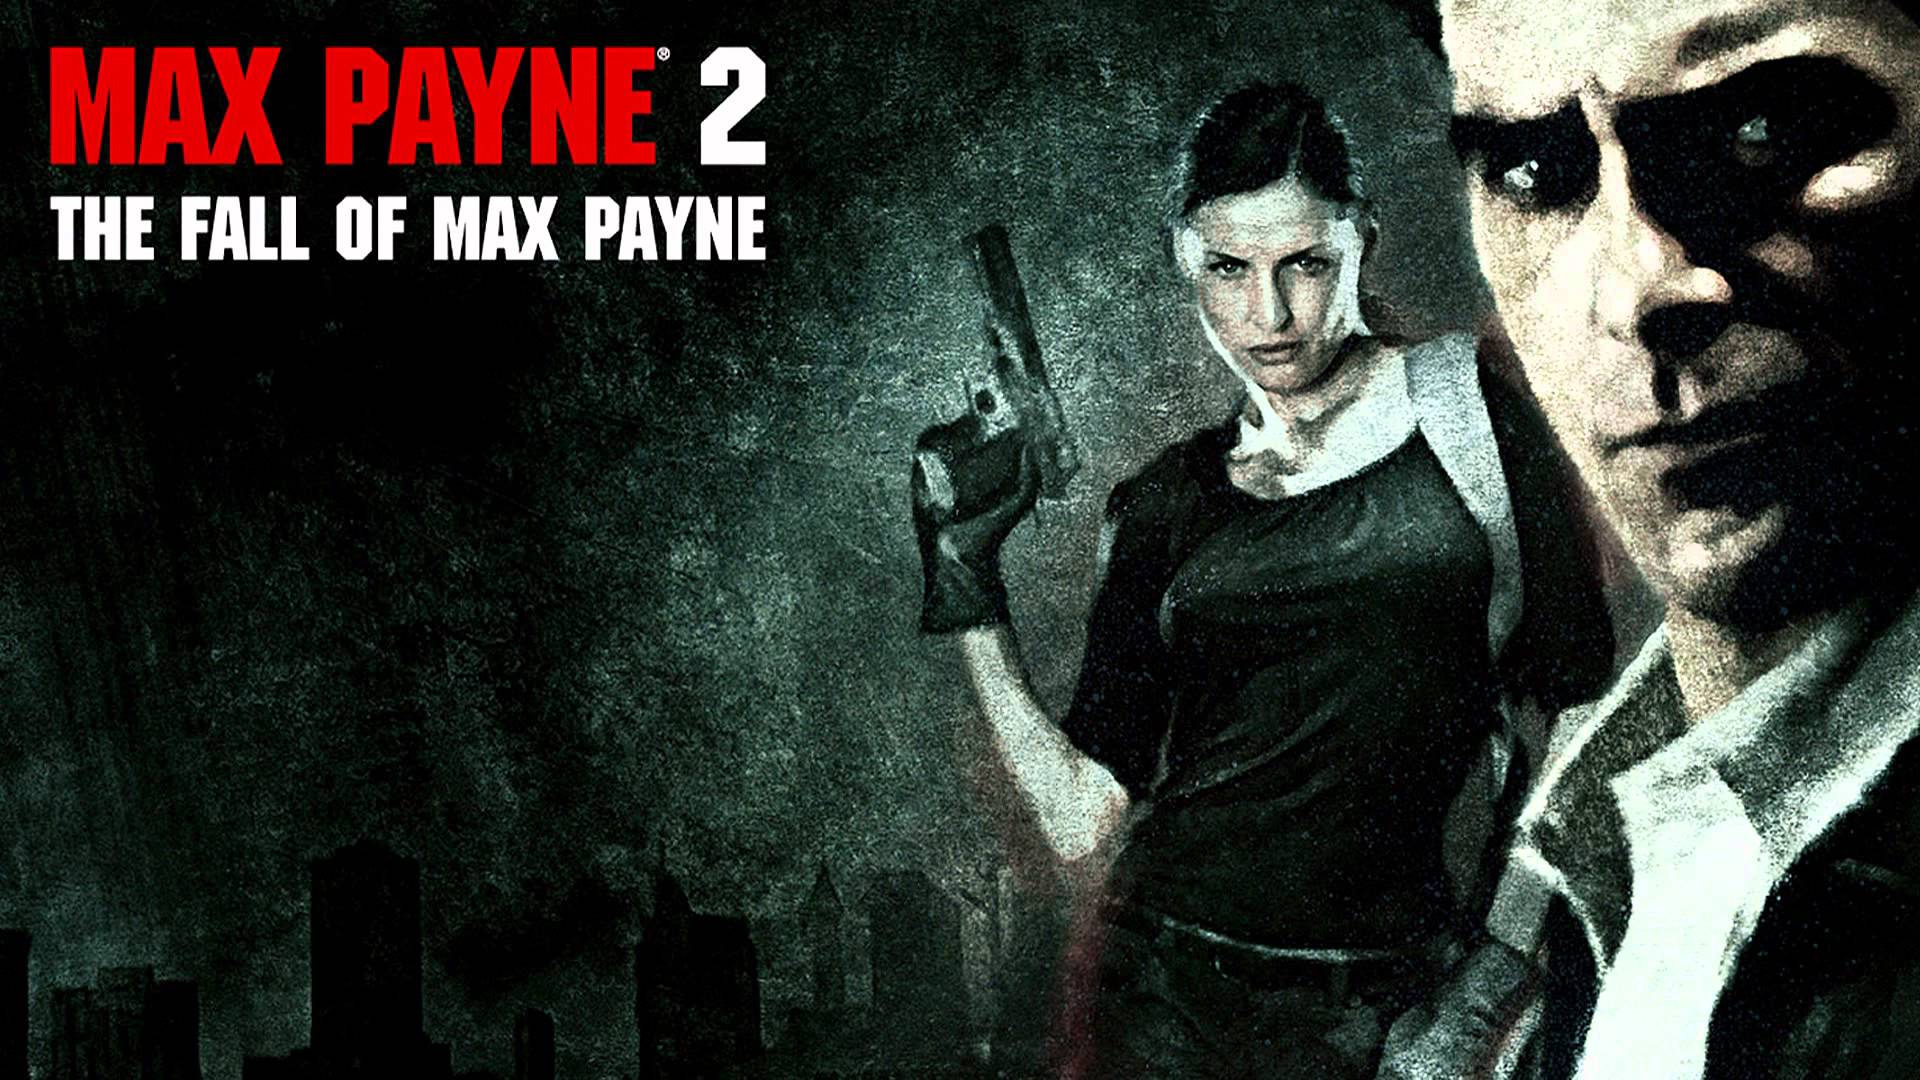 max payne 4 is upcoming pc game release date